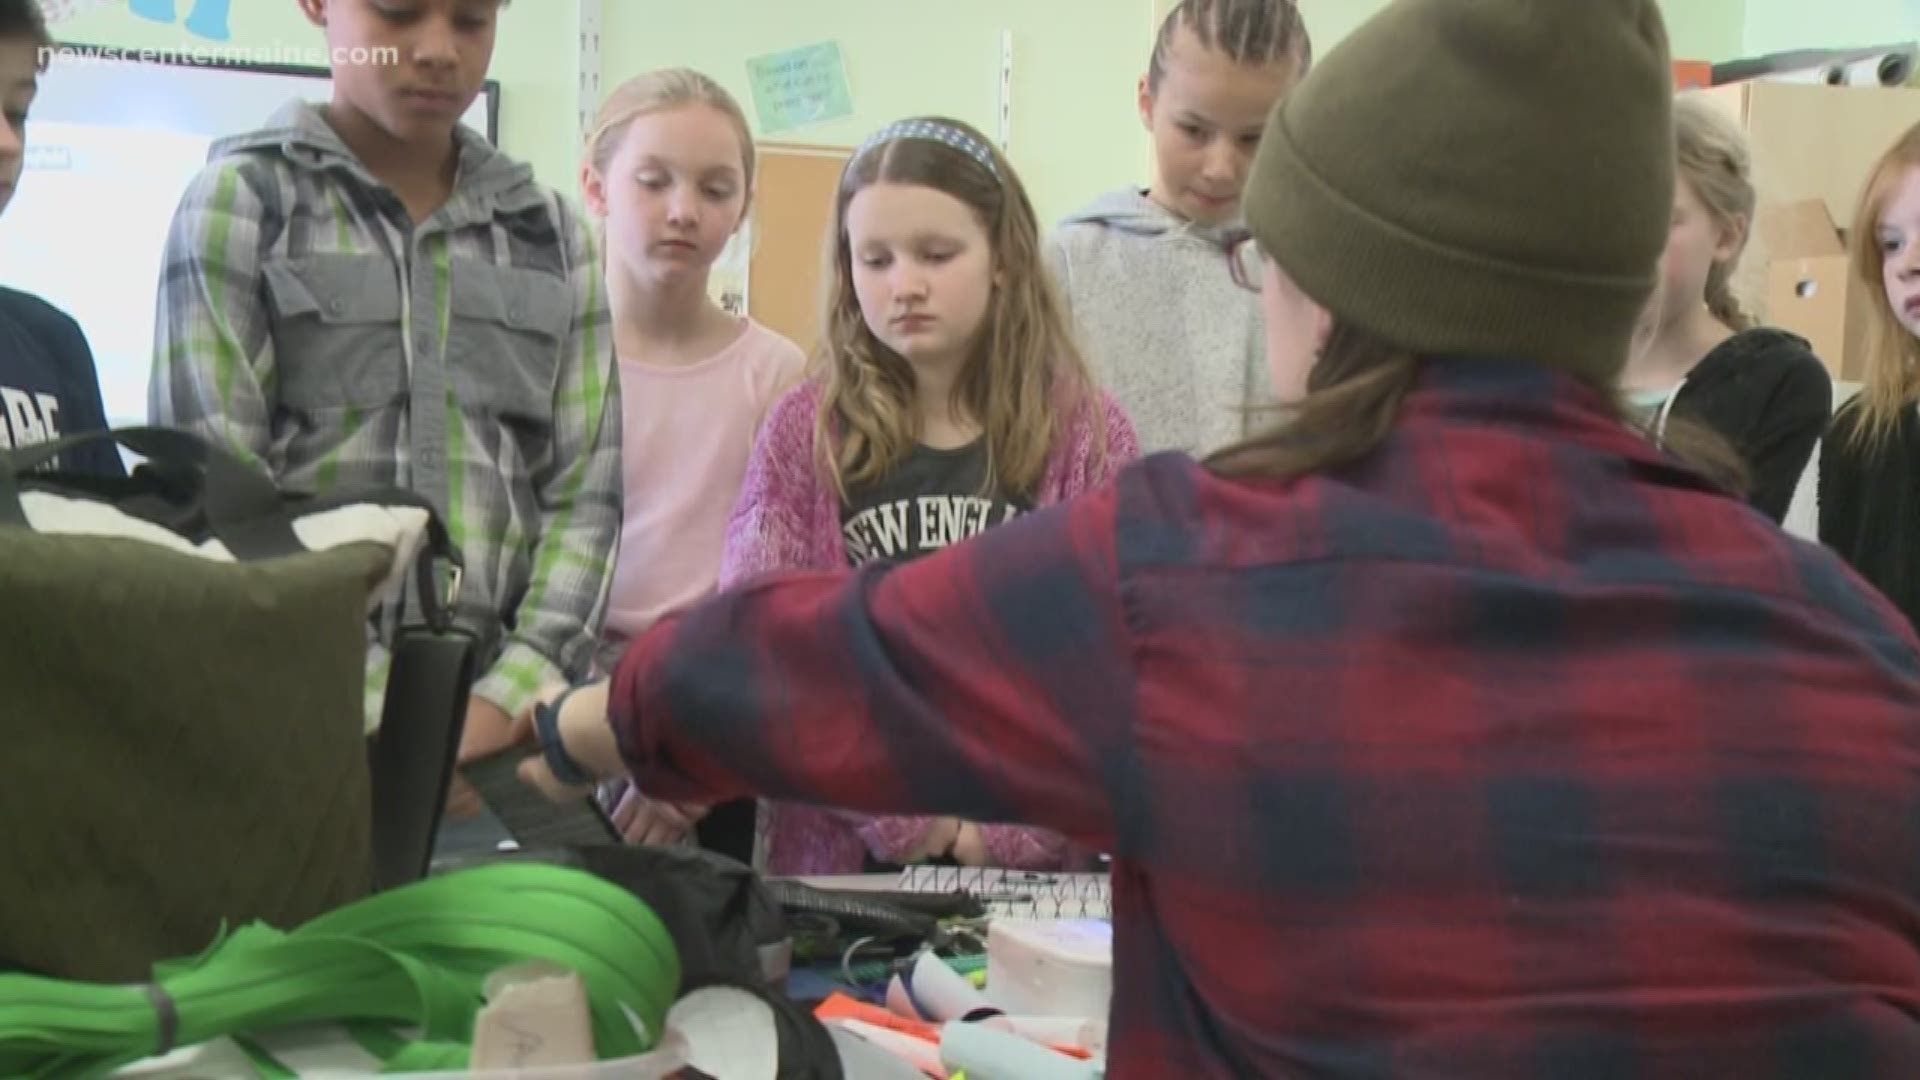 Schools are always looking for creative ways to raise money to pay for things that they need... One elementary school in South Portland is hoping it's creative curriculam will lead to some cash.